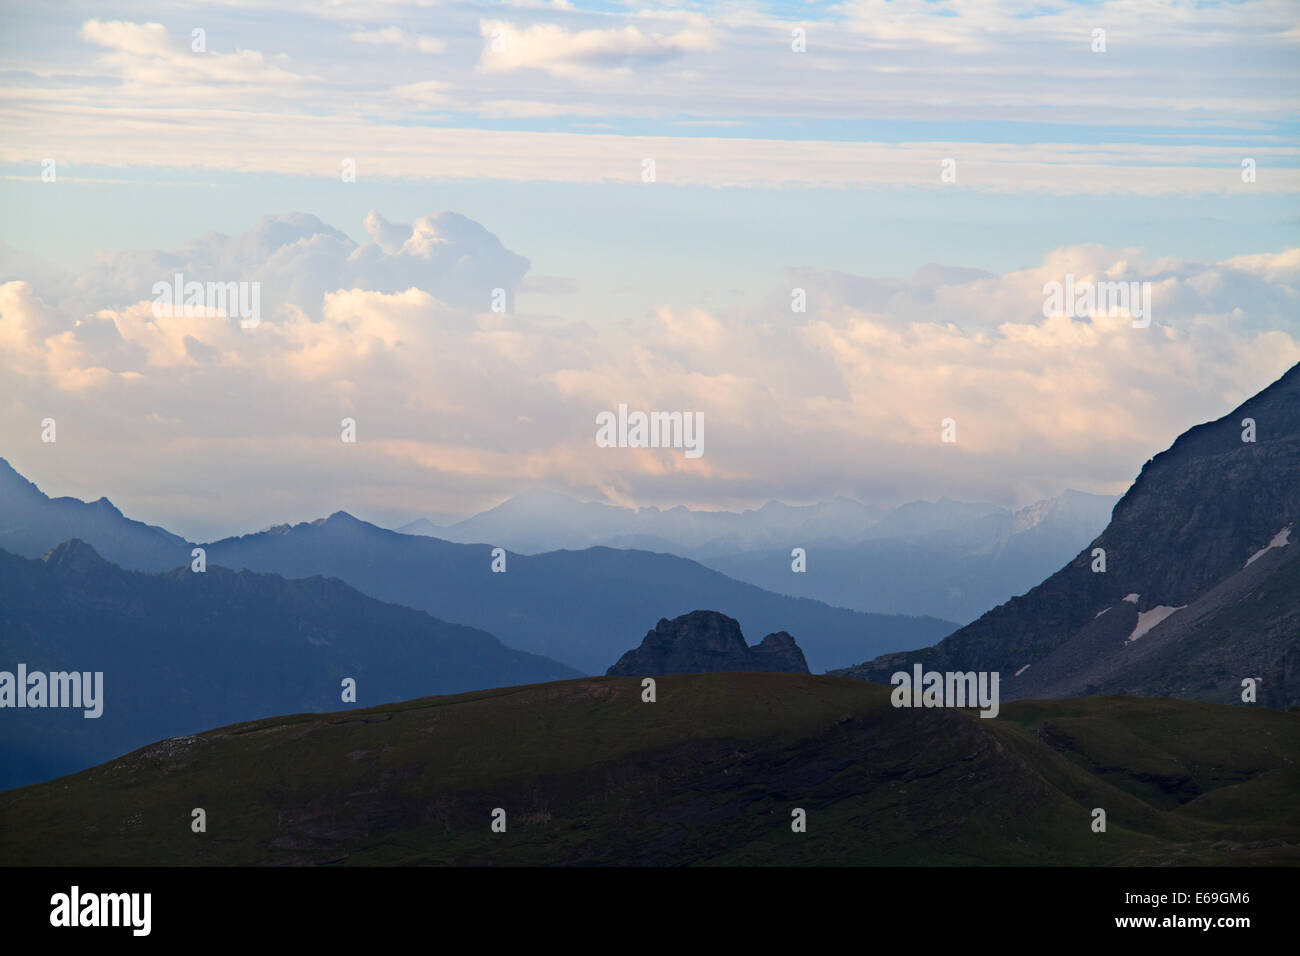 Overlapping mountain ridges in several shades of blue at sunrise Stock Photo